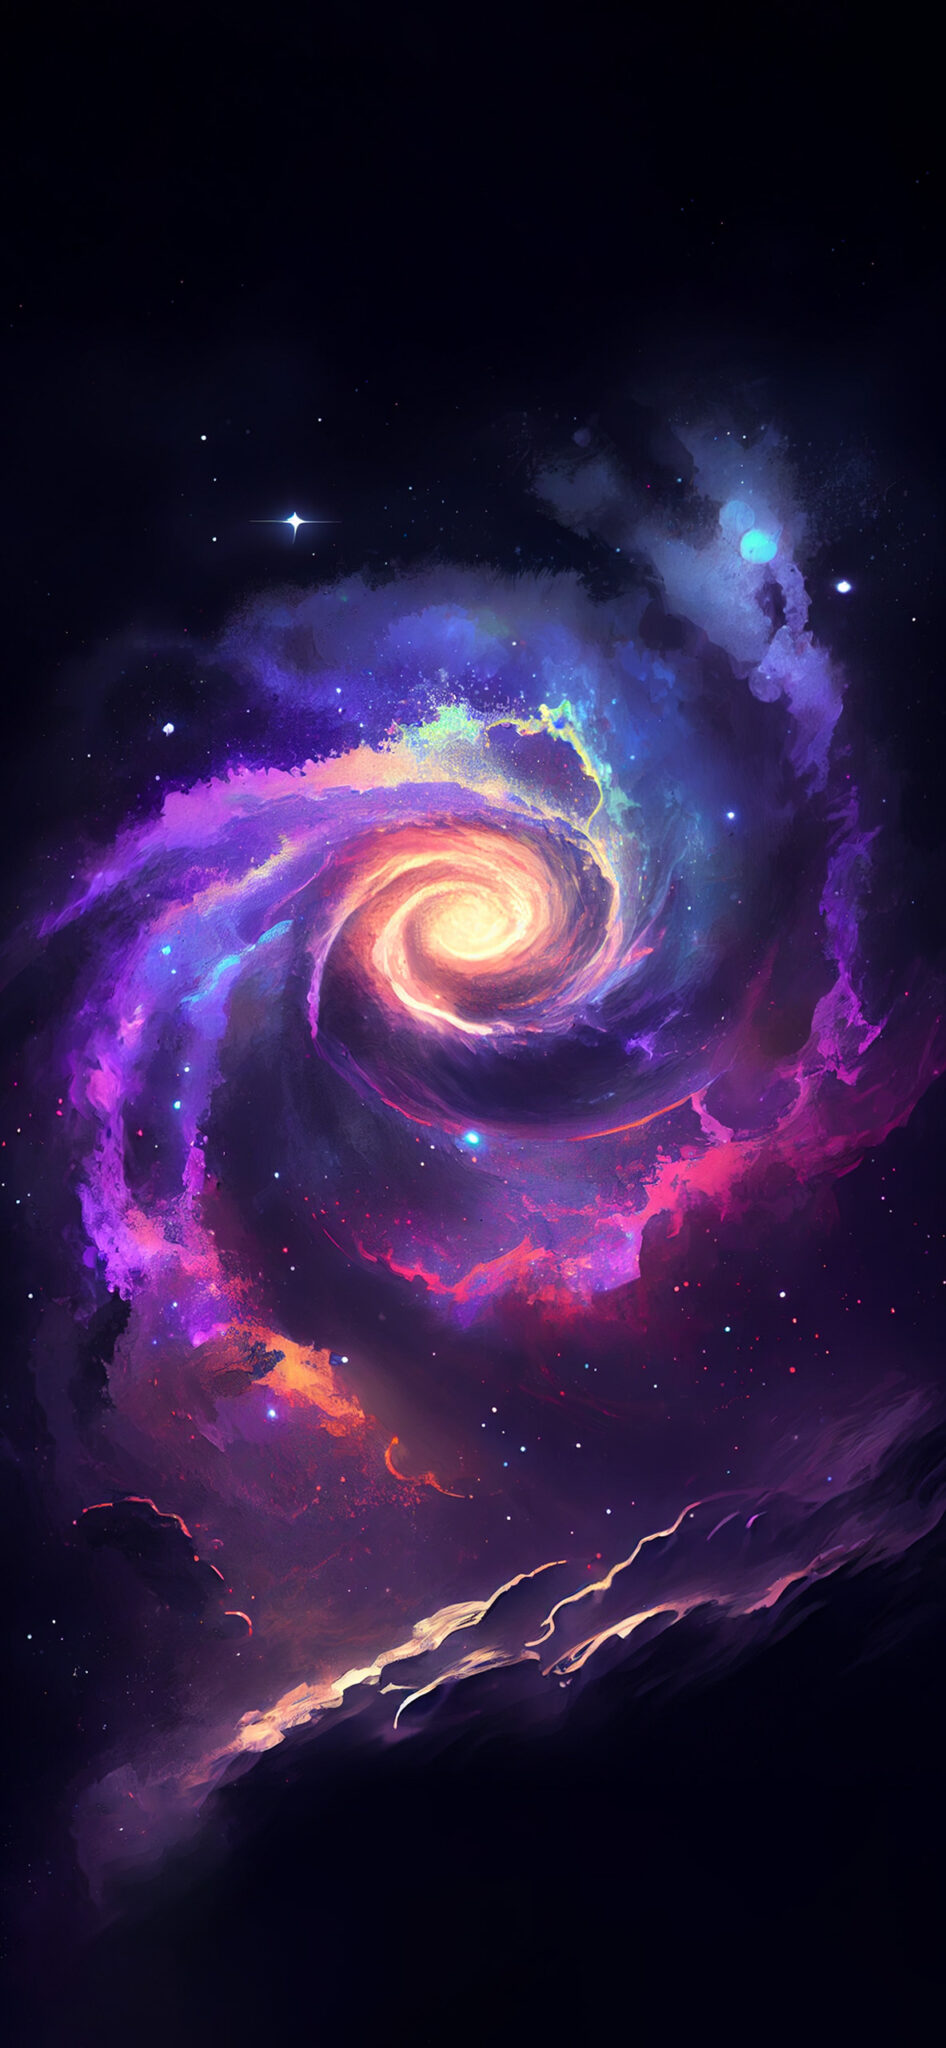 Spiral Galaxy Art Wallpapers - Aesthetic Space Wallpapers iPhone